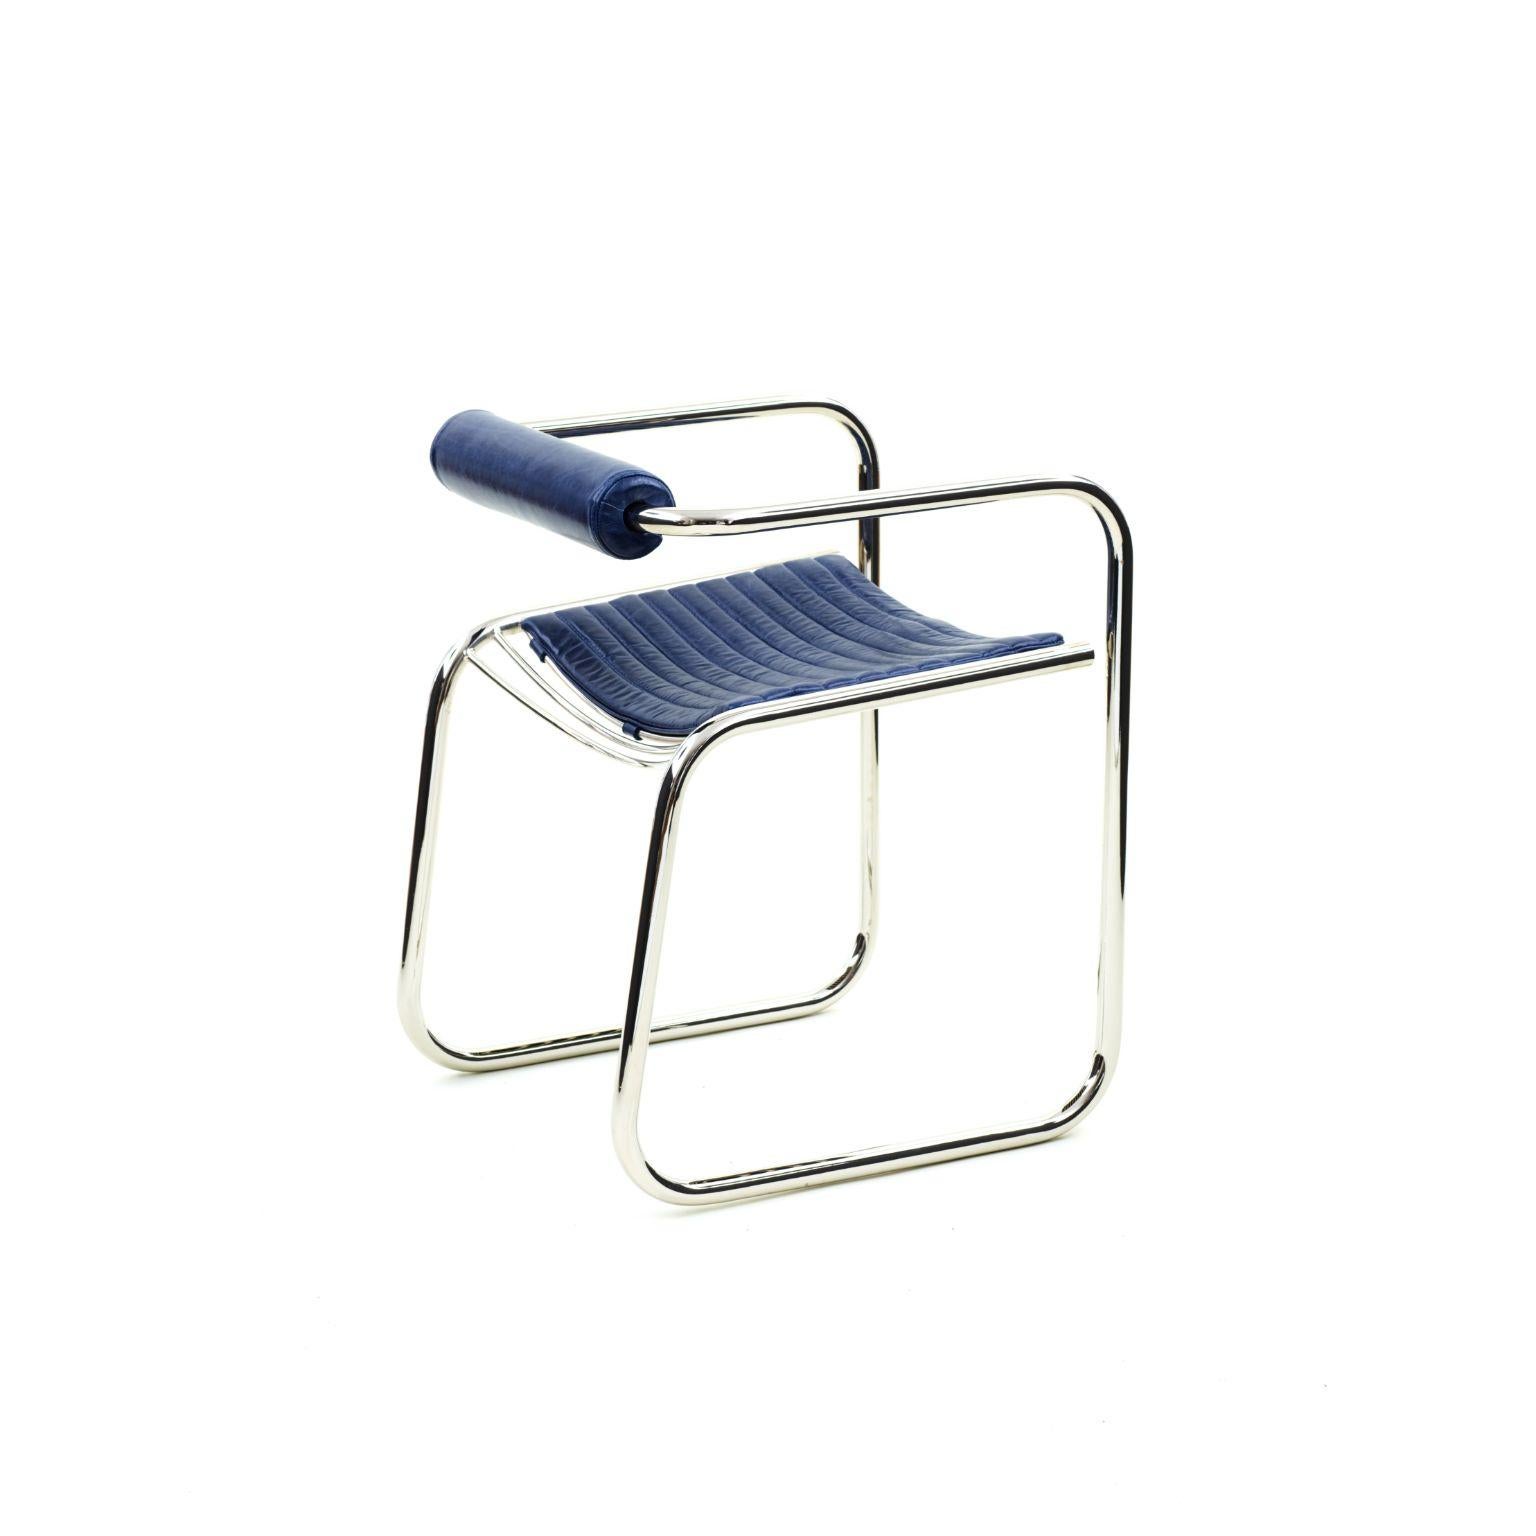 Swing blue chair by Rue Intérieure
Dimensions: D66 x W55.9 x H48.2 cm
Materials: Steel, leather
Designed and made in Montreal, Canada

Swing chair was born by playing with metal tubing.
In relation to historic designs, Swing mixes the rigidity